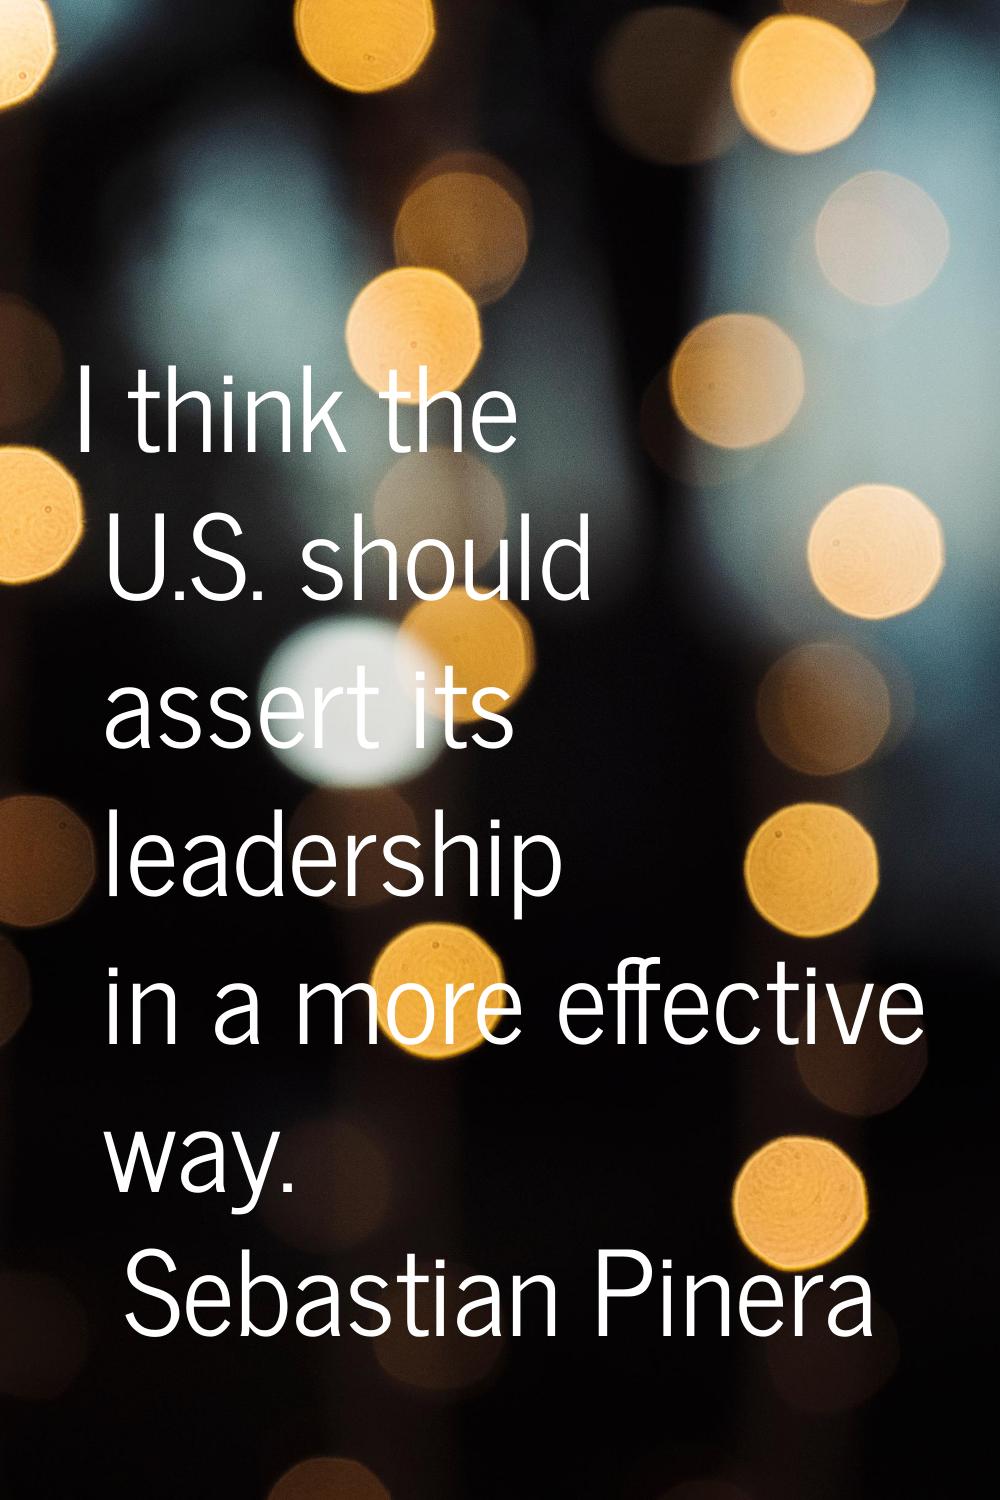 I think the U.S. should assert its leadership in a more effective way.